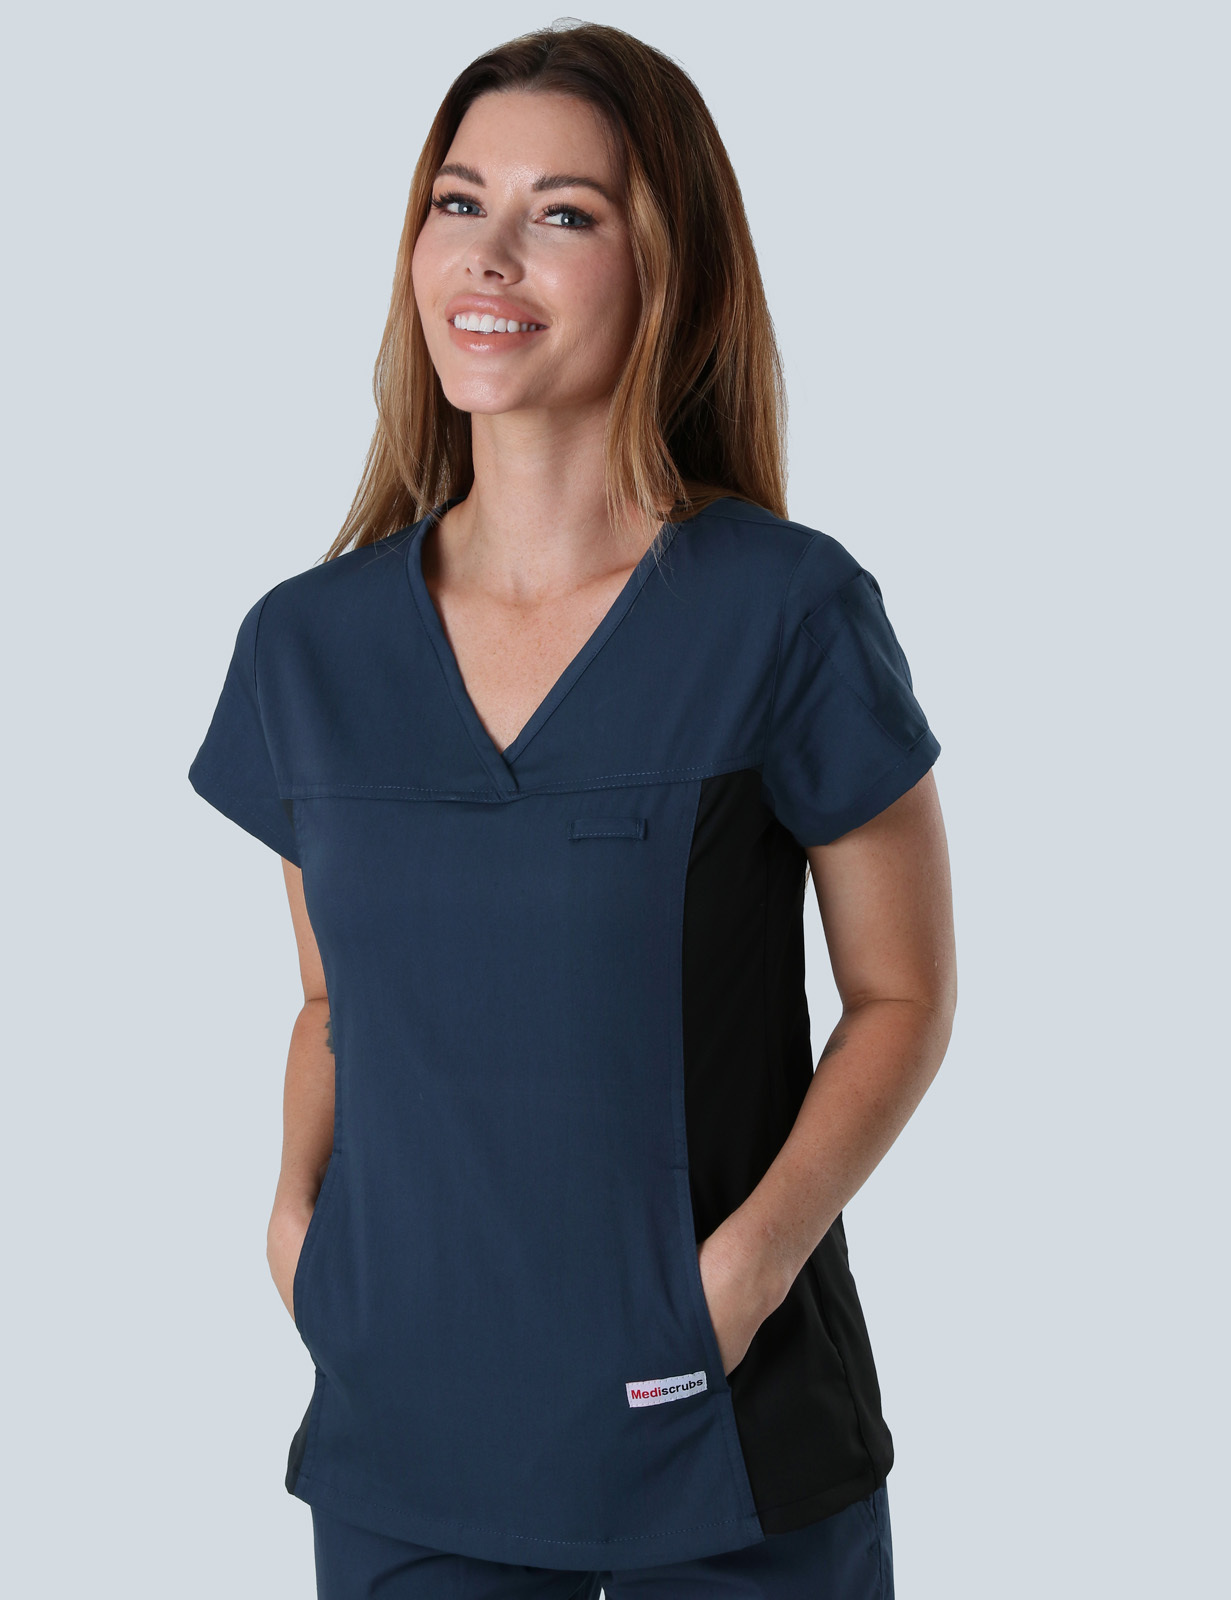 Logan Hospital - ICU CN (Women's Fit Spandex Scrub Top and Cargo Pants in Navy incl Logos)